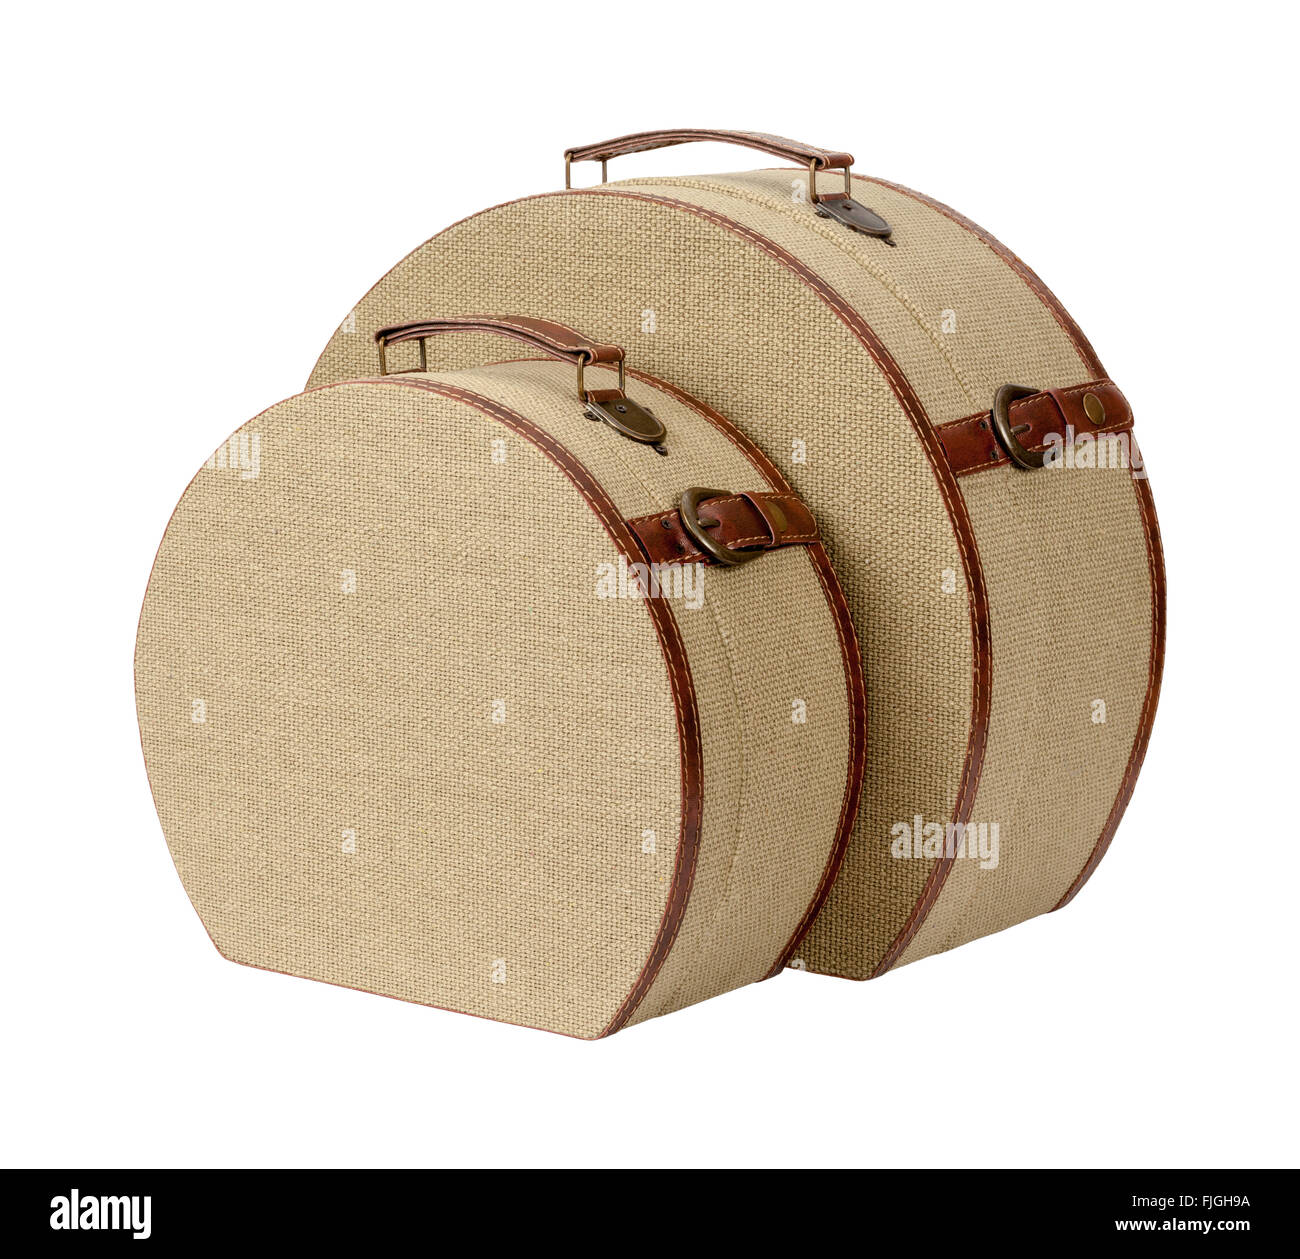 Two Round Deco Burlap Suitcases. The image is a cut out, isolated on a white background. Stock Photo